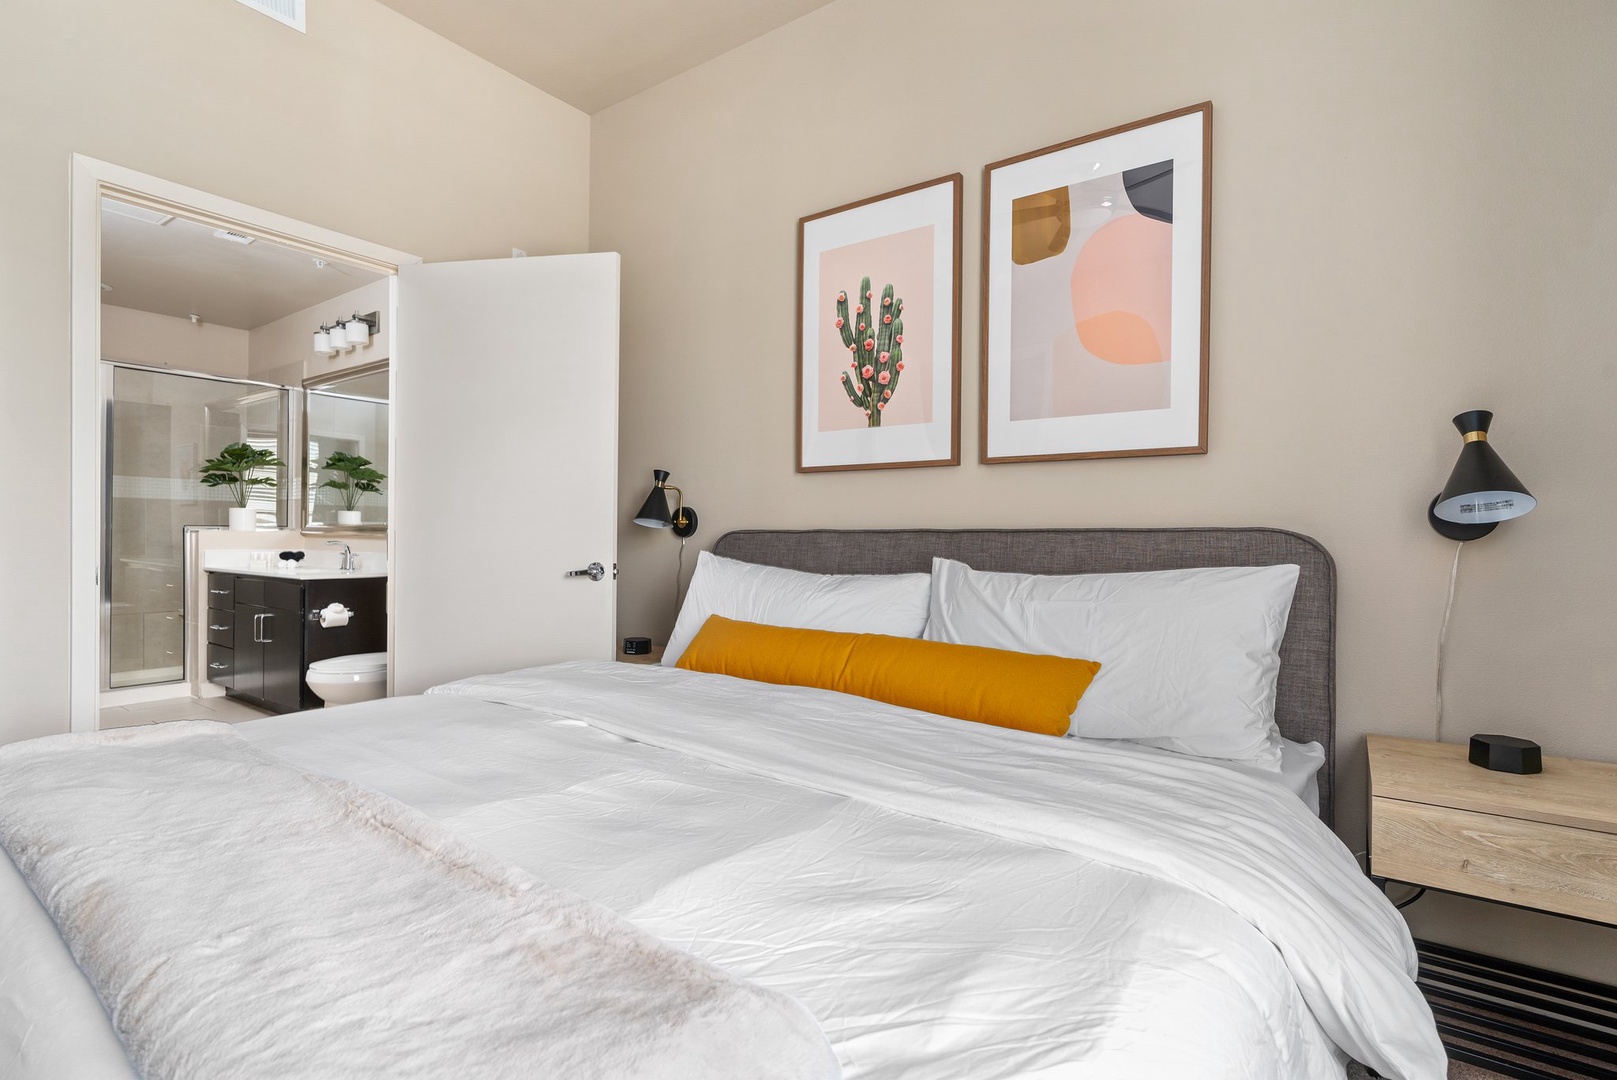 Rejuvenate in comfort on a memory foam bed in this inviting bedroom.